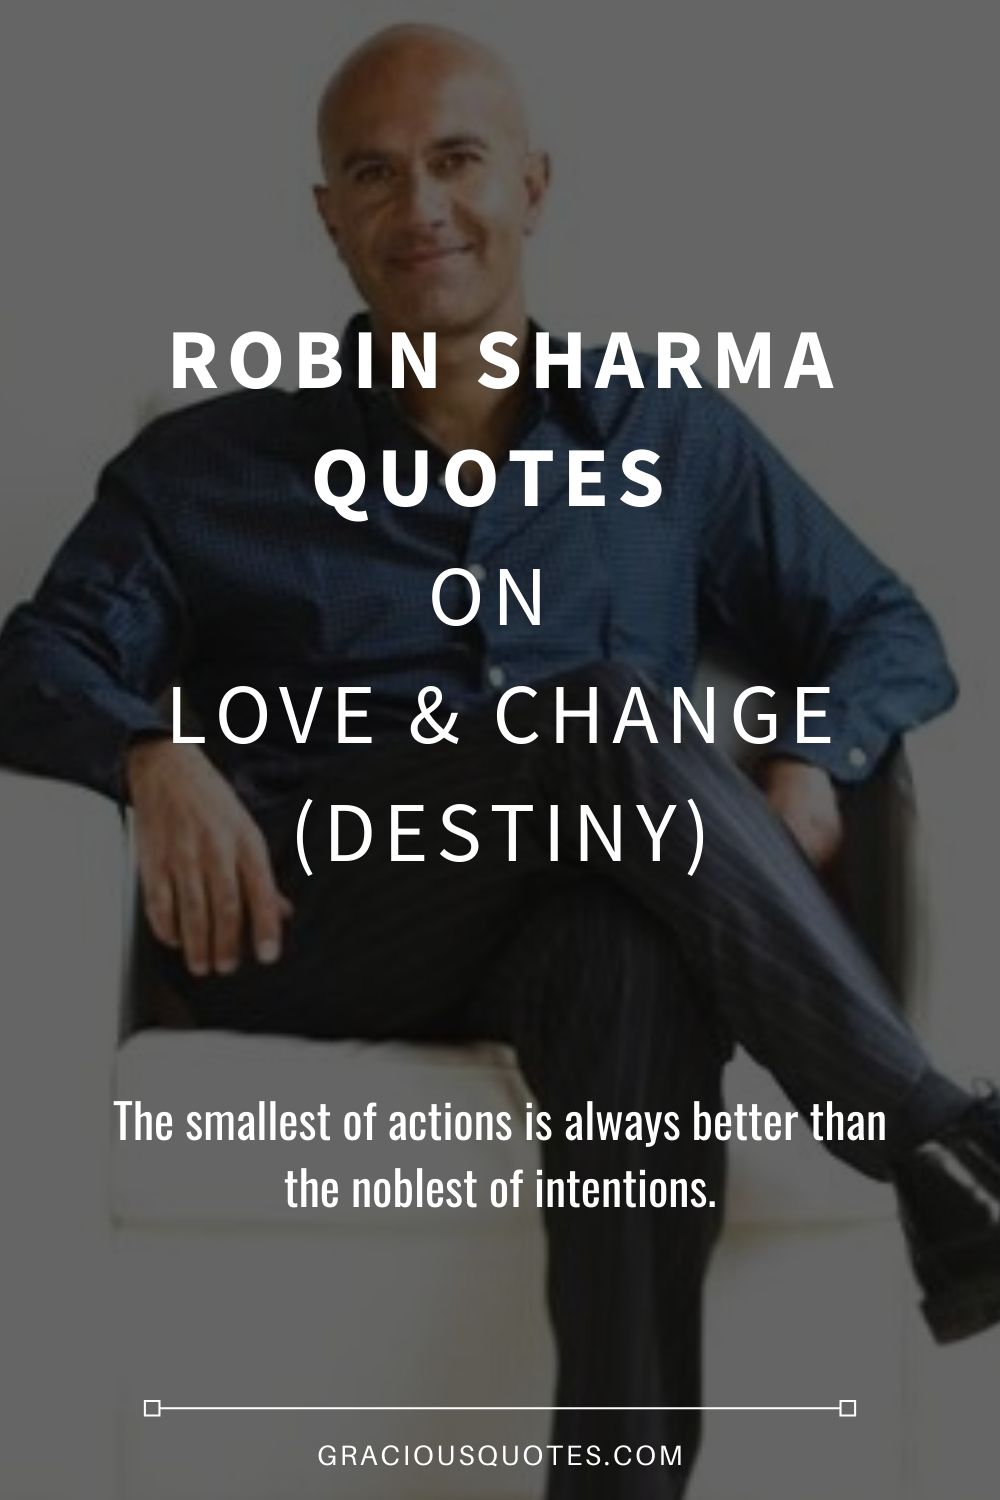 Robin Sharma Quotes on Love & Change (DESTINY) - Gracious Quotes